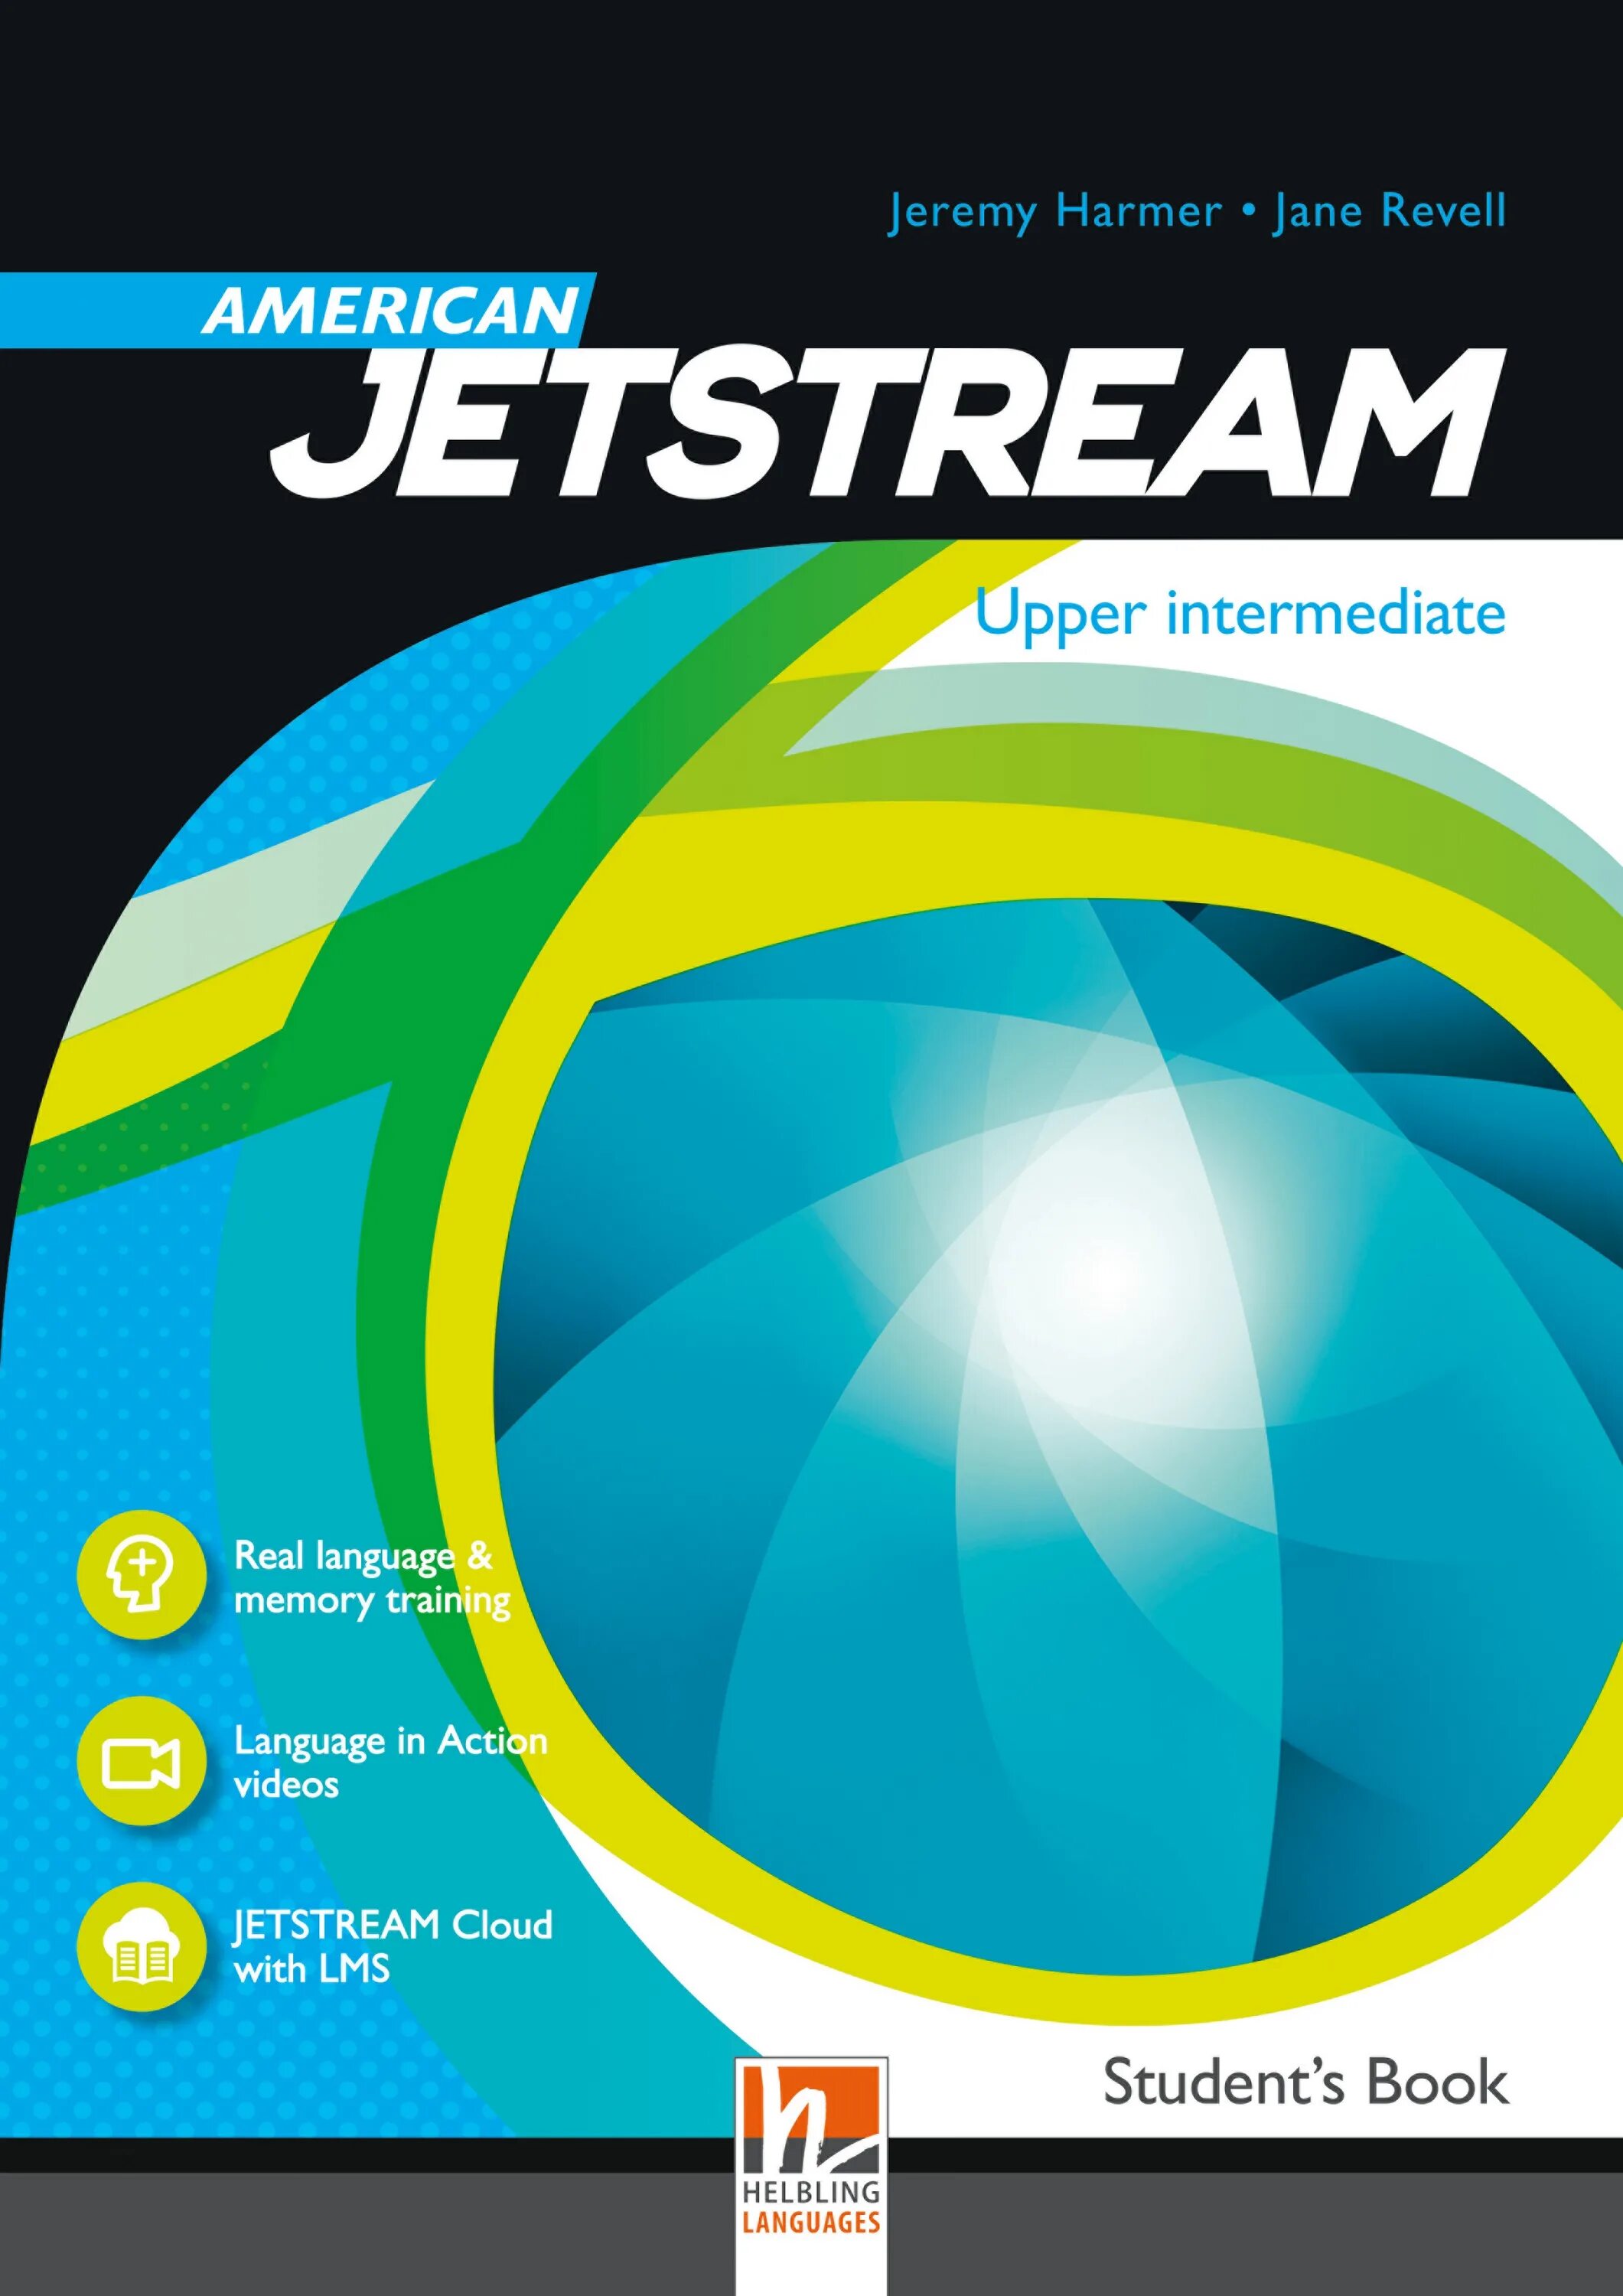 Jetstream students book. Perspectives pre-Intermediate student's book. Intermediate student's book. Perspectives Intermediate student's book. More student book